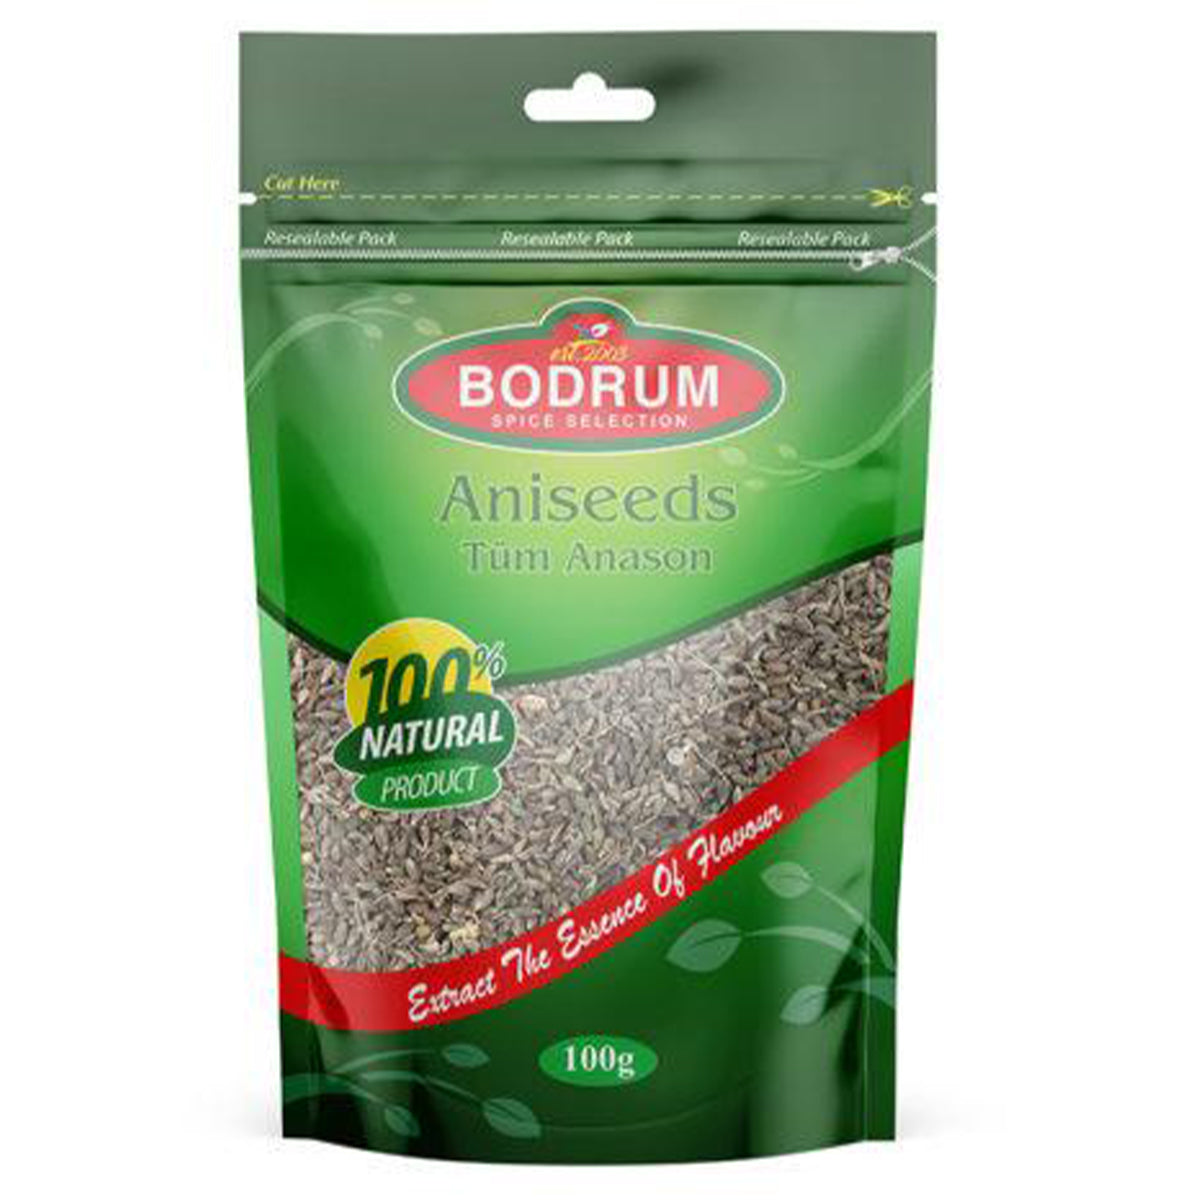 Bodrum - Aniseed - 100g by Bodrum in a bag.